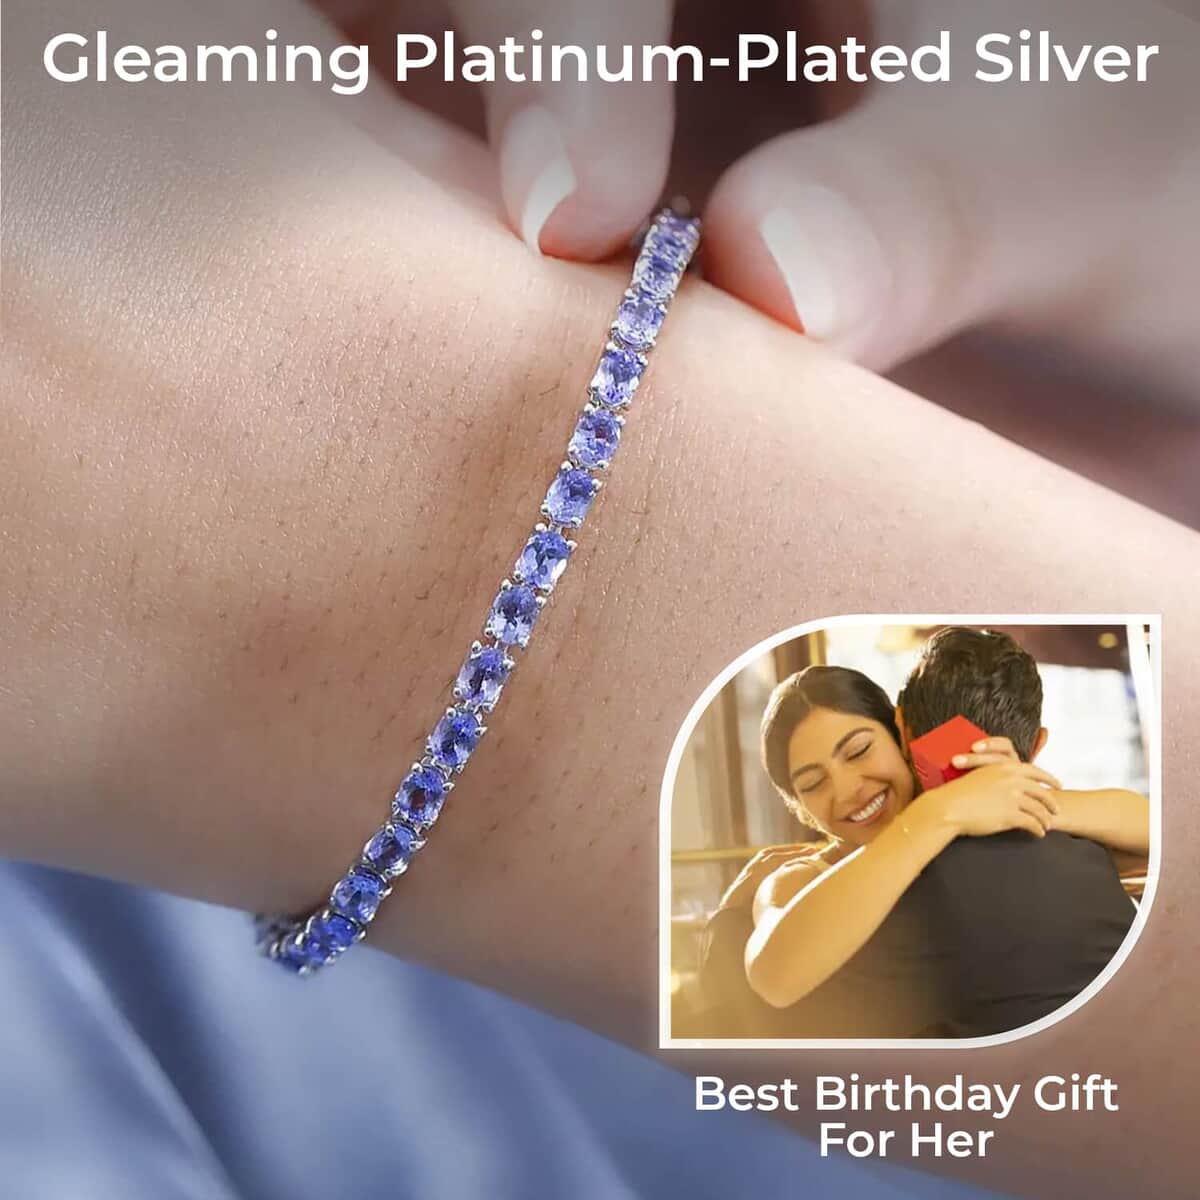 Tanzanite 8.15 ctw Tennis Bracelet, Platinum Over Sterling Silver Bracelet, Tanzanite Jewelry, Gifts For Her (7.25 In) image number 2